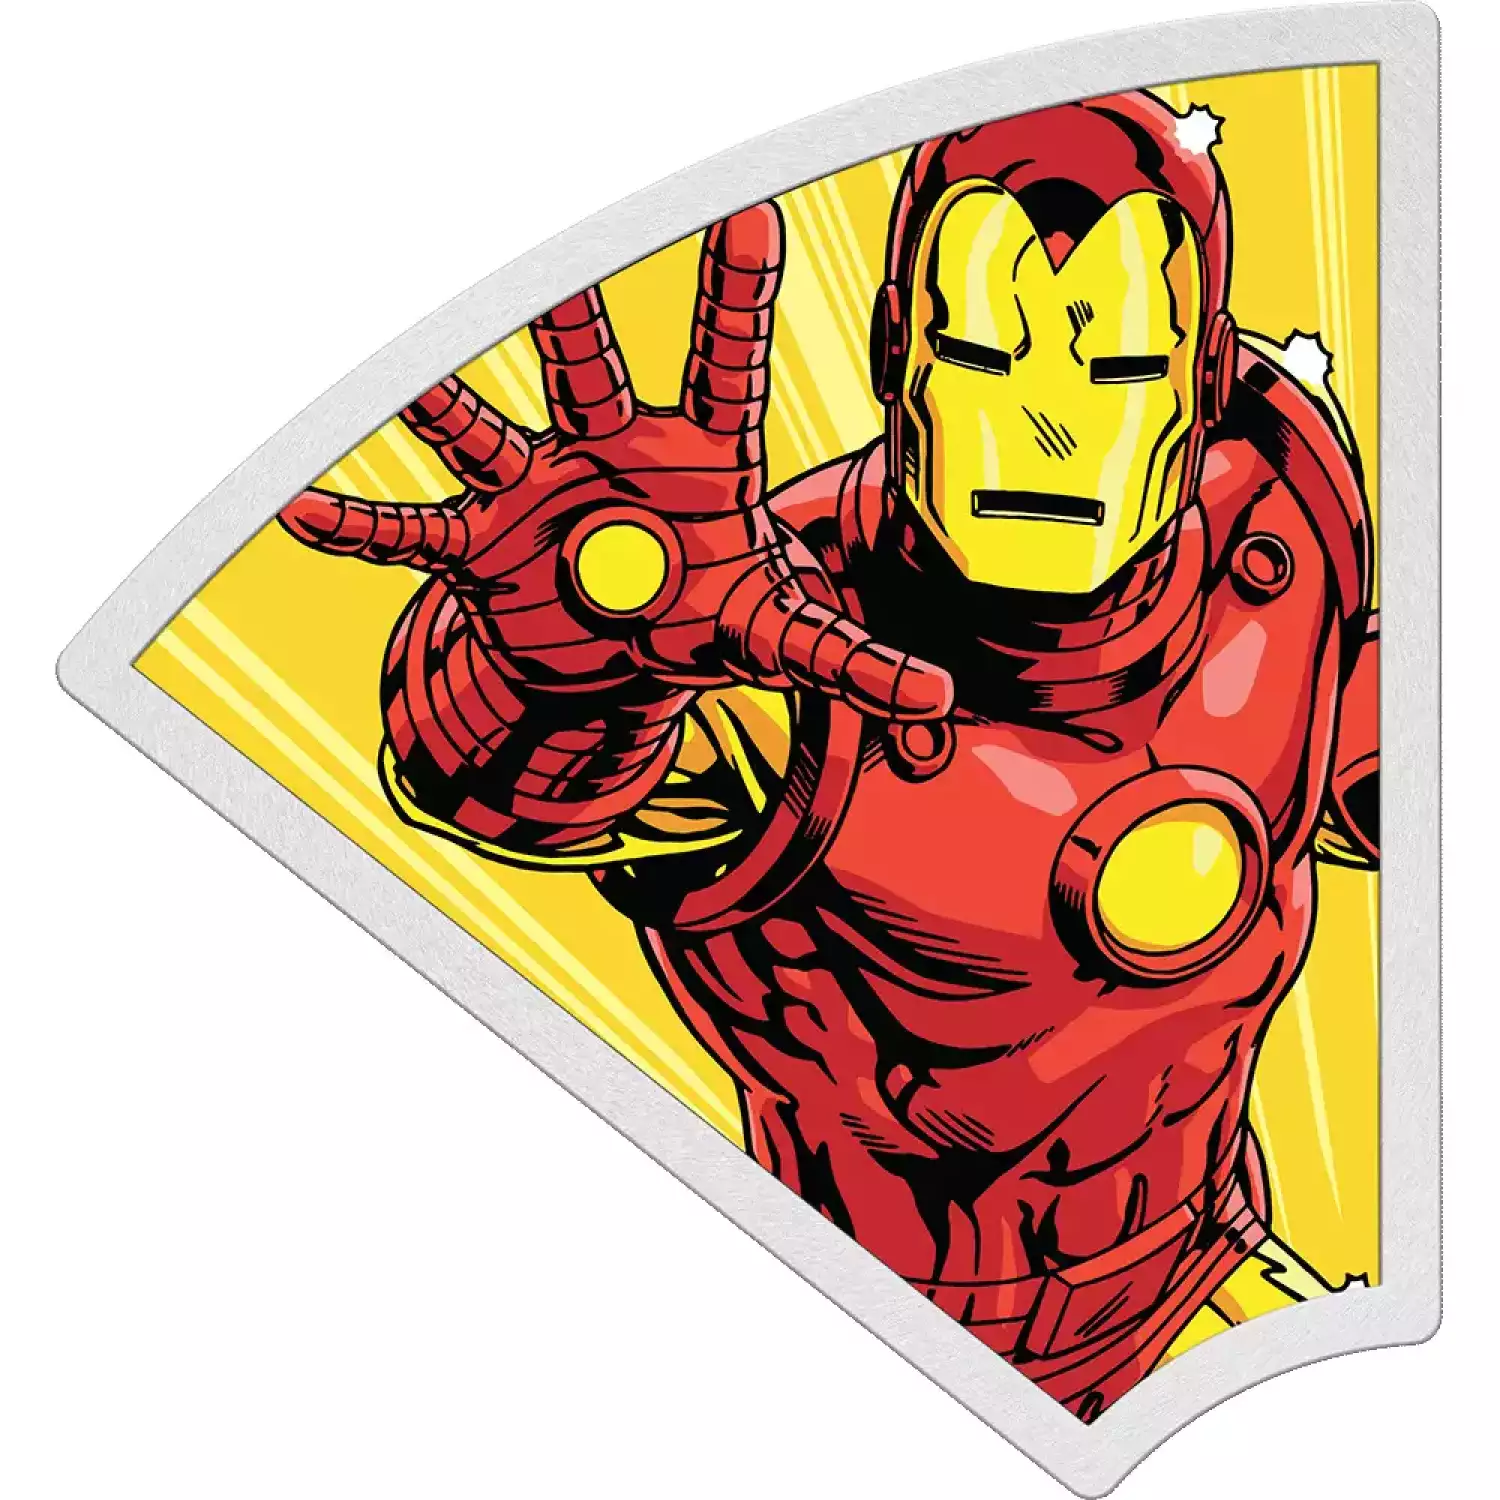 2023 Niue Marvel Avengers 60th Ann. Iron Man 1oz Silver Colorized Proof Coin (2)